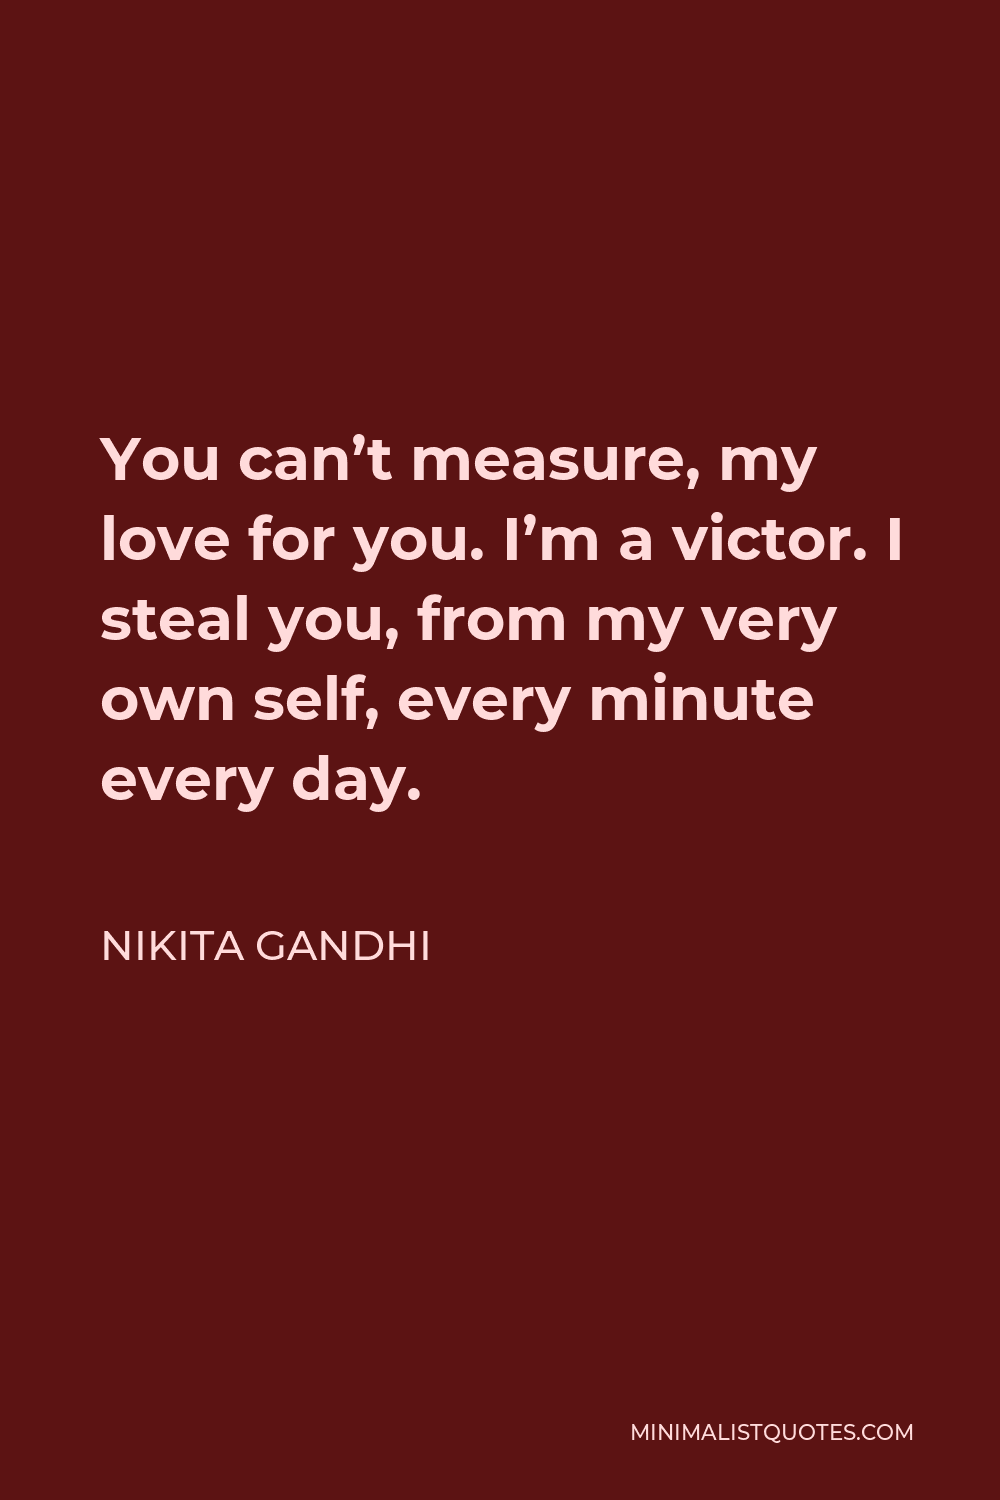 Nikita Gandhi Quote - You can’t measure, my love for you. I’m a victor. I steal you, from my very own self, every minute every day.